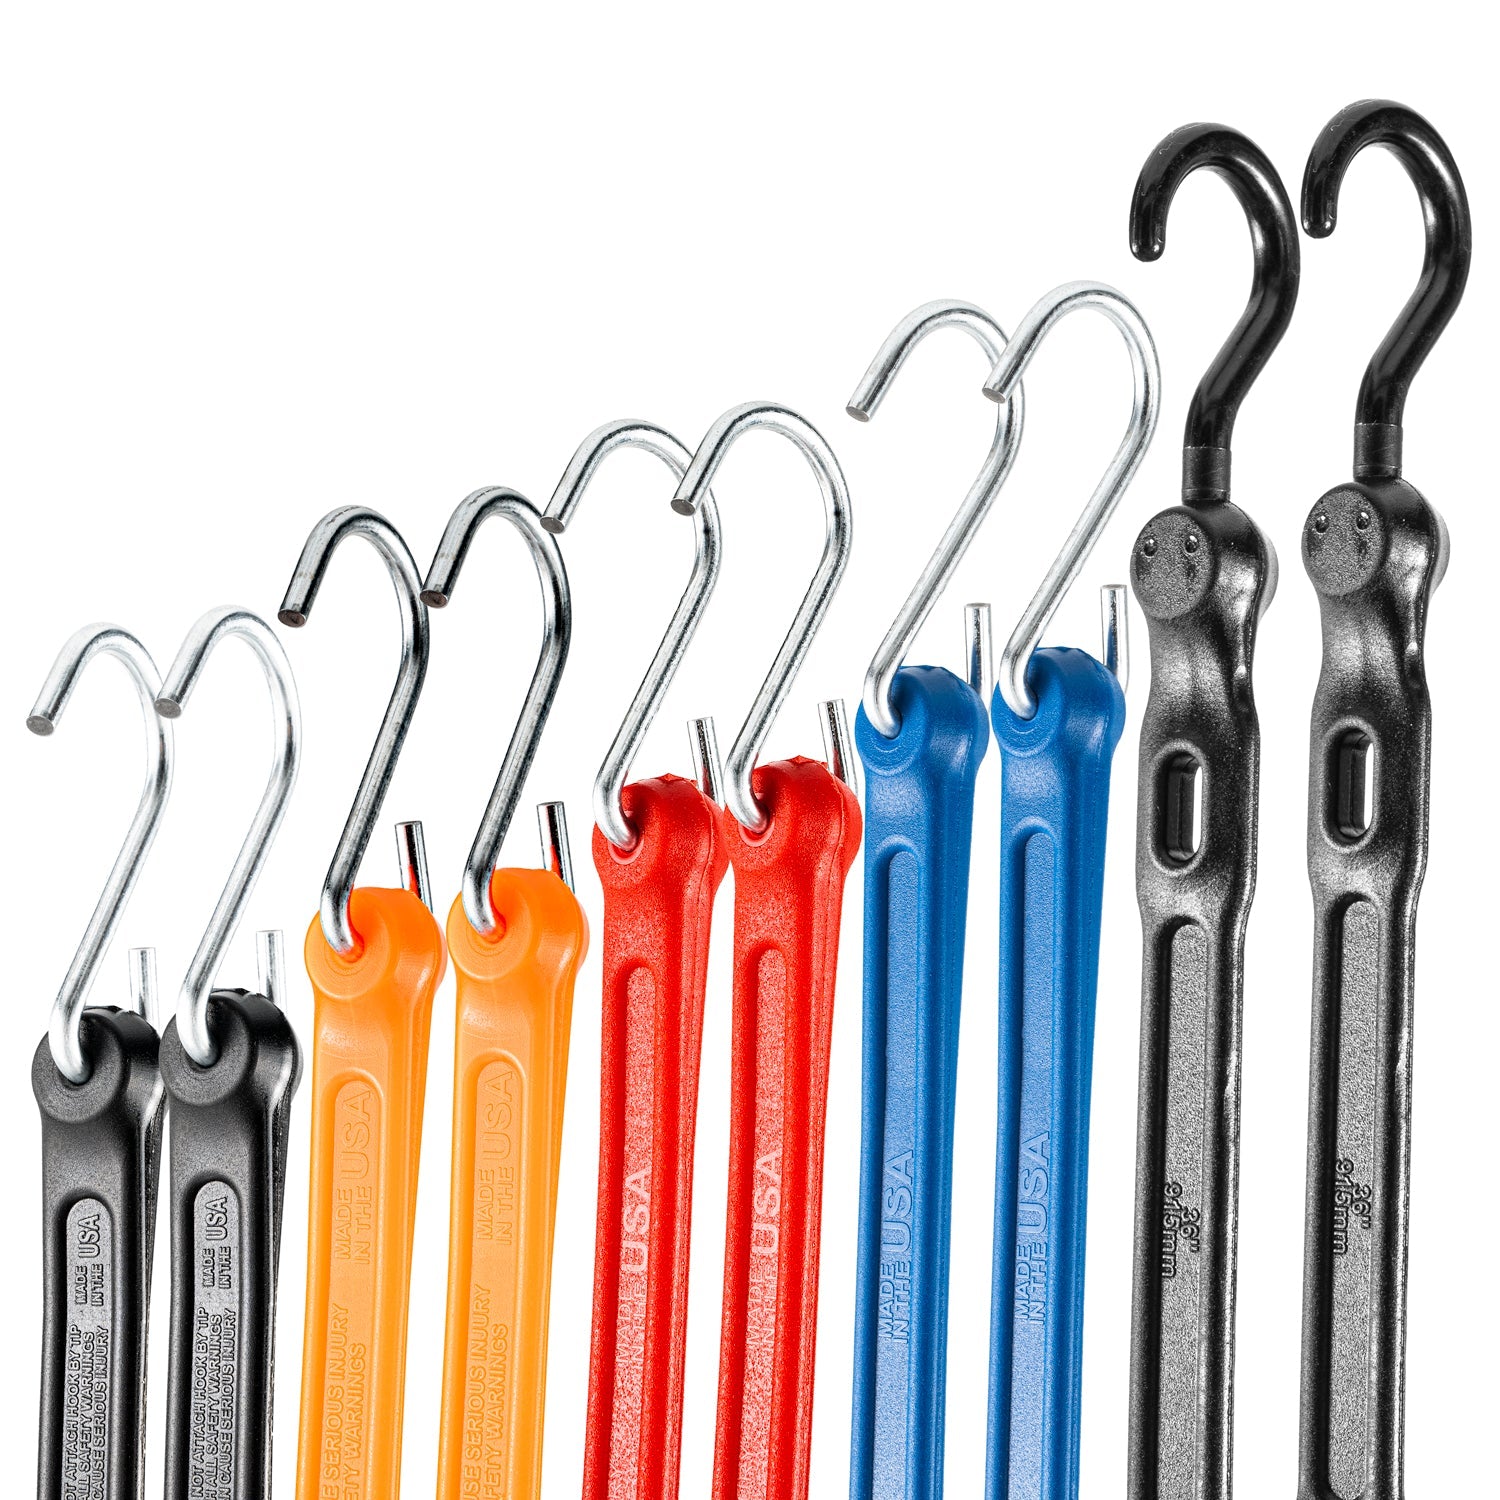 10pc Variety Pack - Standard Duty Straps + Adjust-A-Straps - The Perfect Bungee & ShockStrap Tie Downs